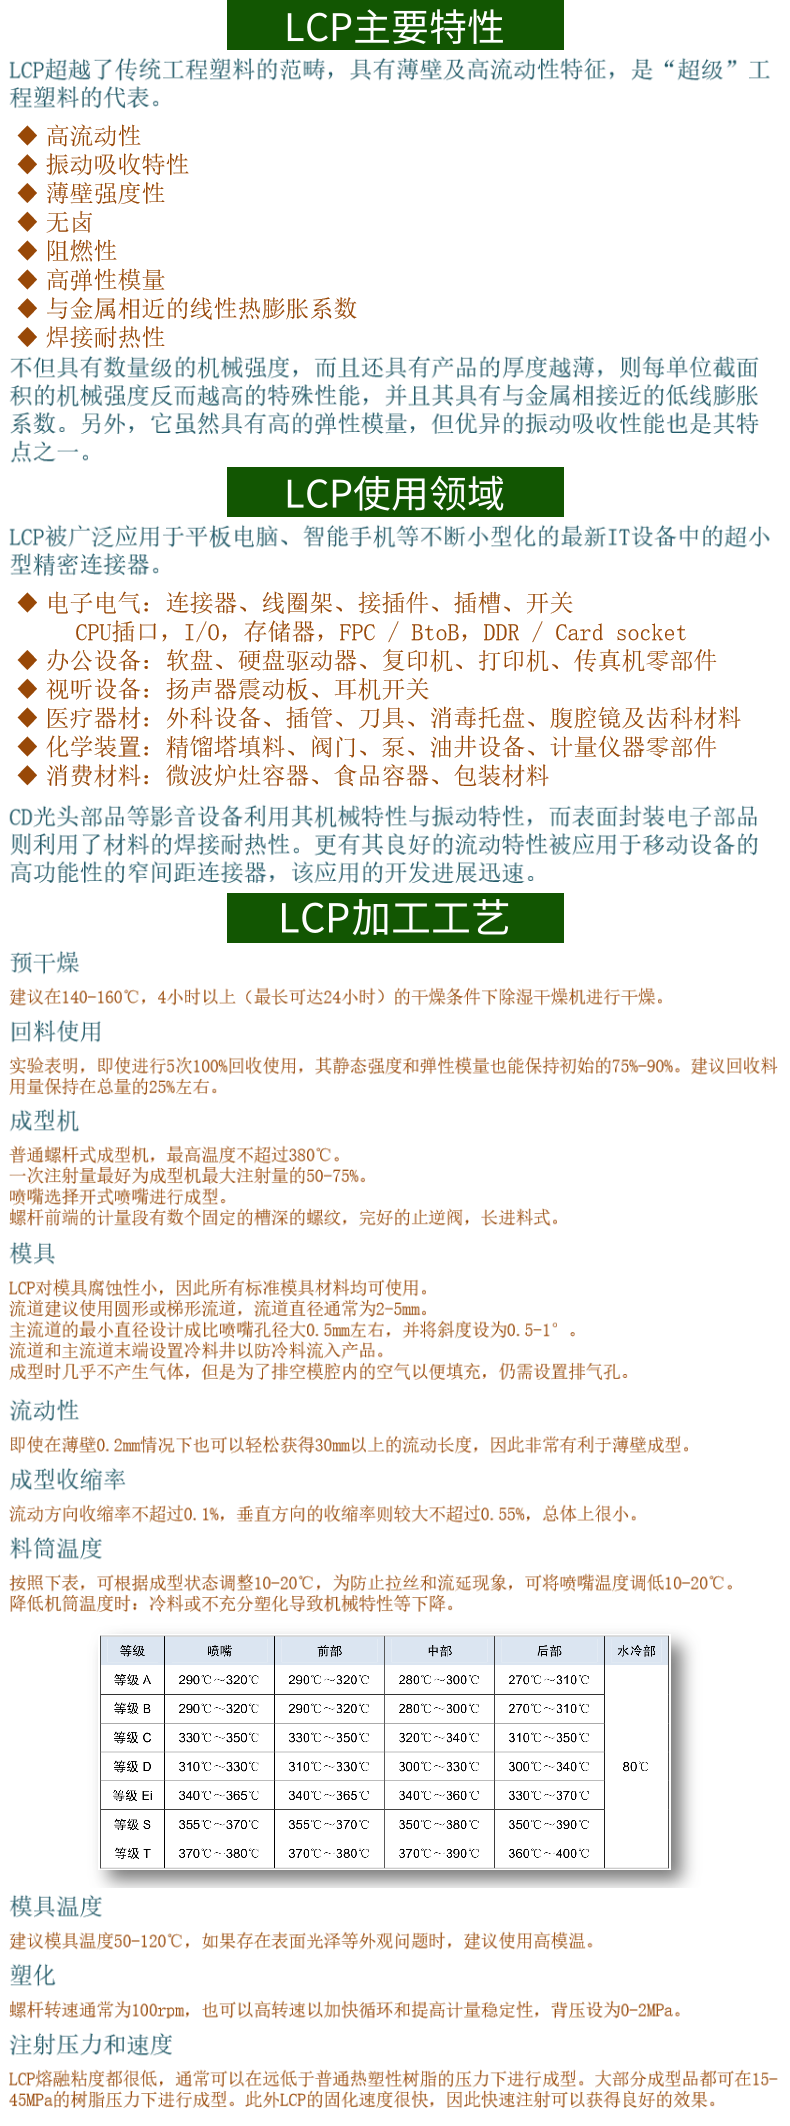 LCP介绍.png.png